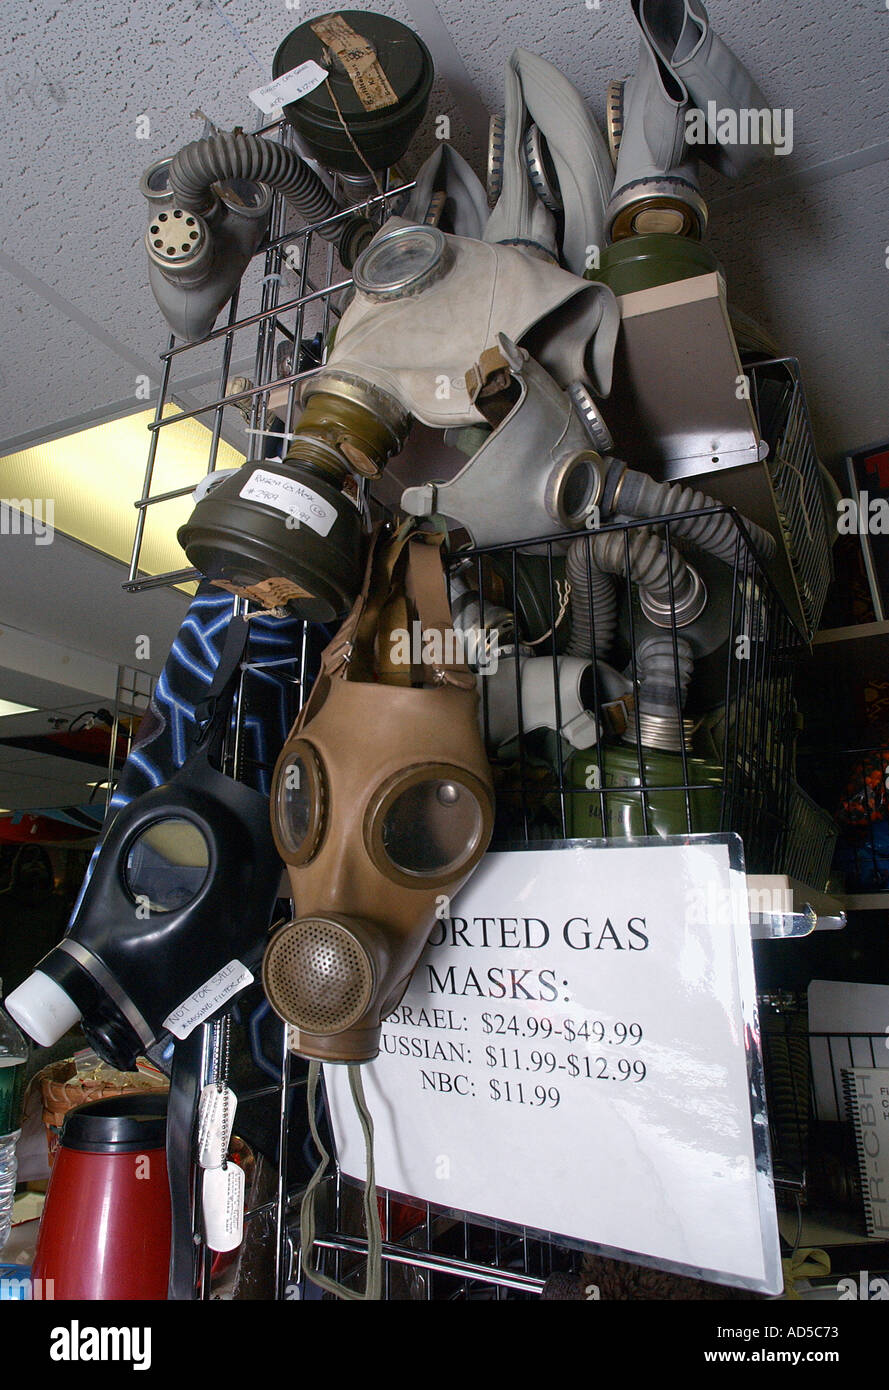 File:Gas Mask Display at Souvenir Stand - Westerplatte - Gdansk - Poland  (28088316575).jpg - Wikimedia Commons